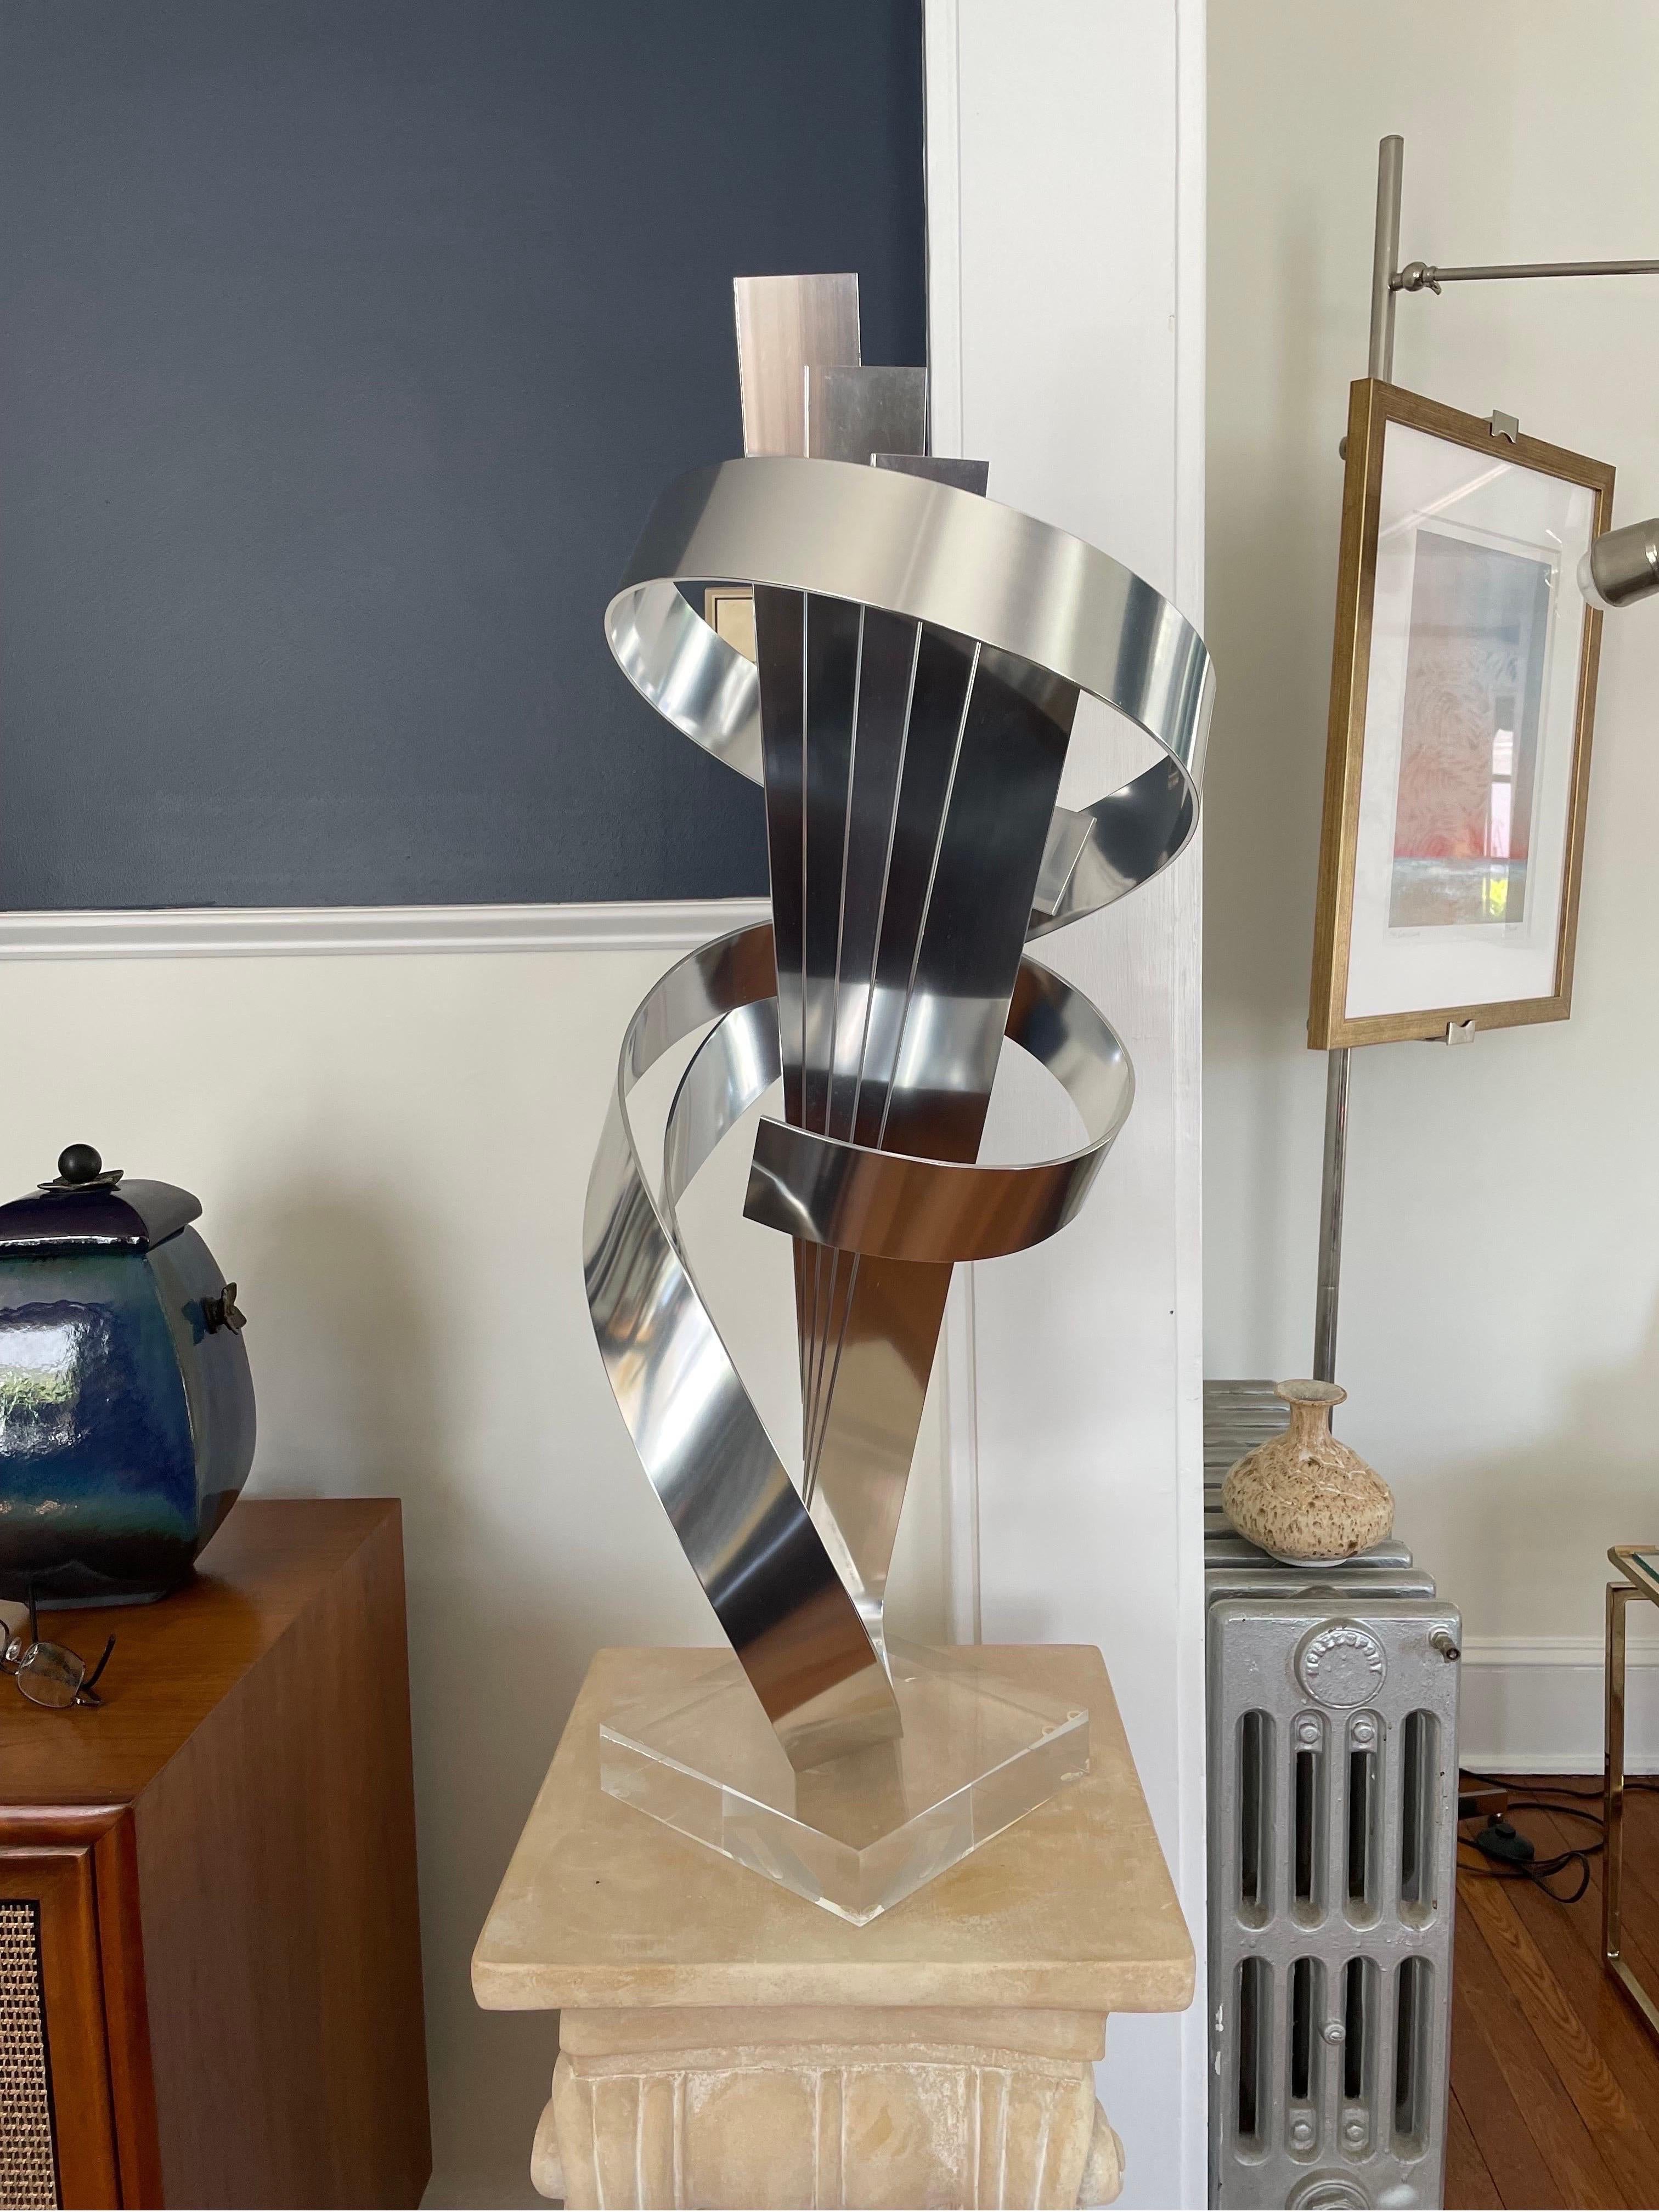 Spectacular presence with this Ribbon Sculpture by Dan Murphy. Unique design with 5 fanned ribbons encircled by a 2 ribbon swirl. Beautiful polished steel set on lucite base. 

Curbside to NYC/Philly $350.